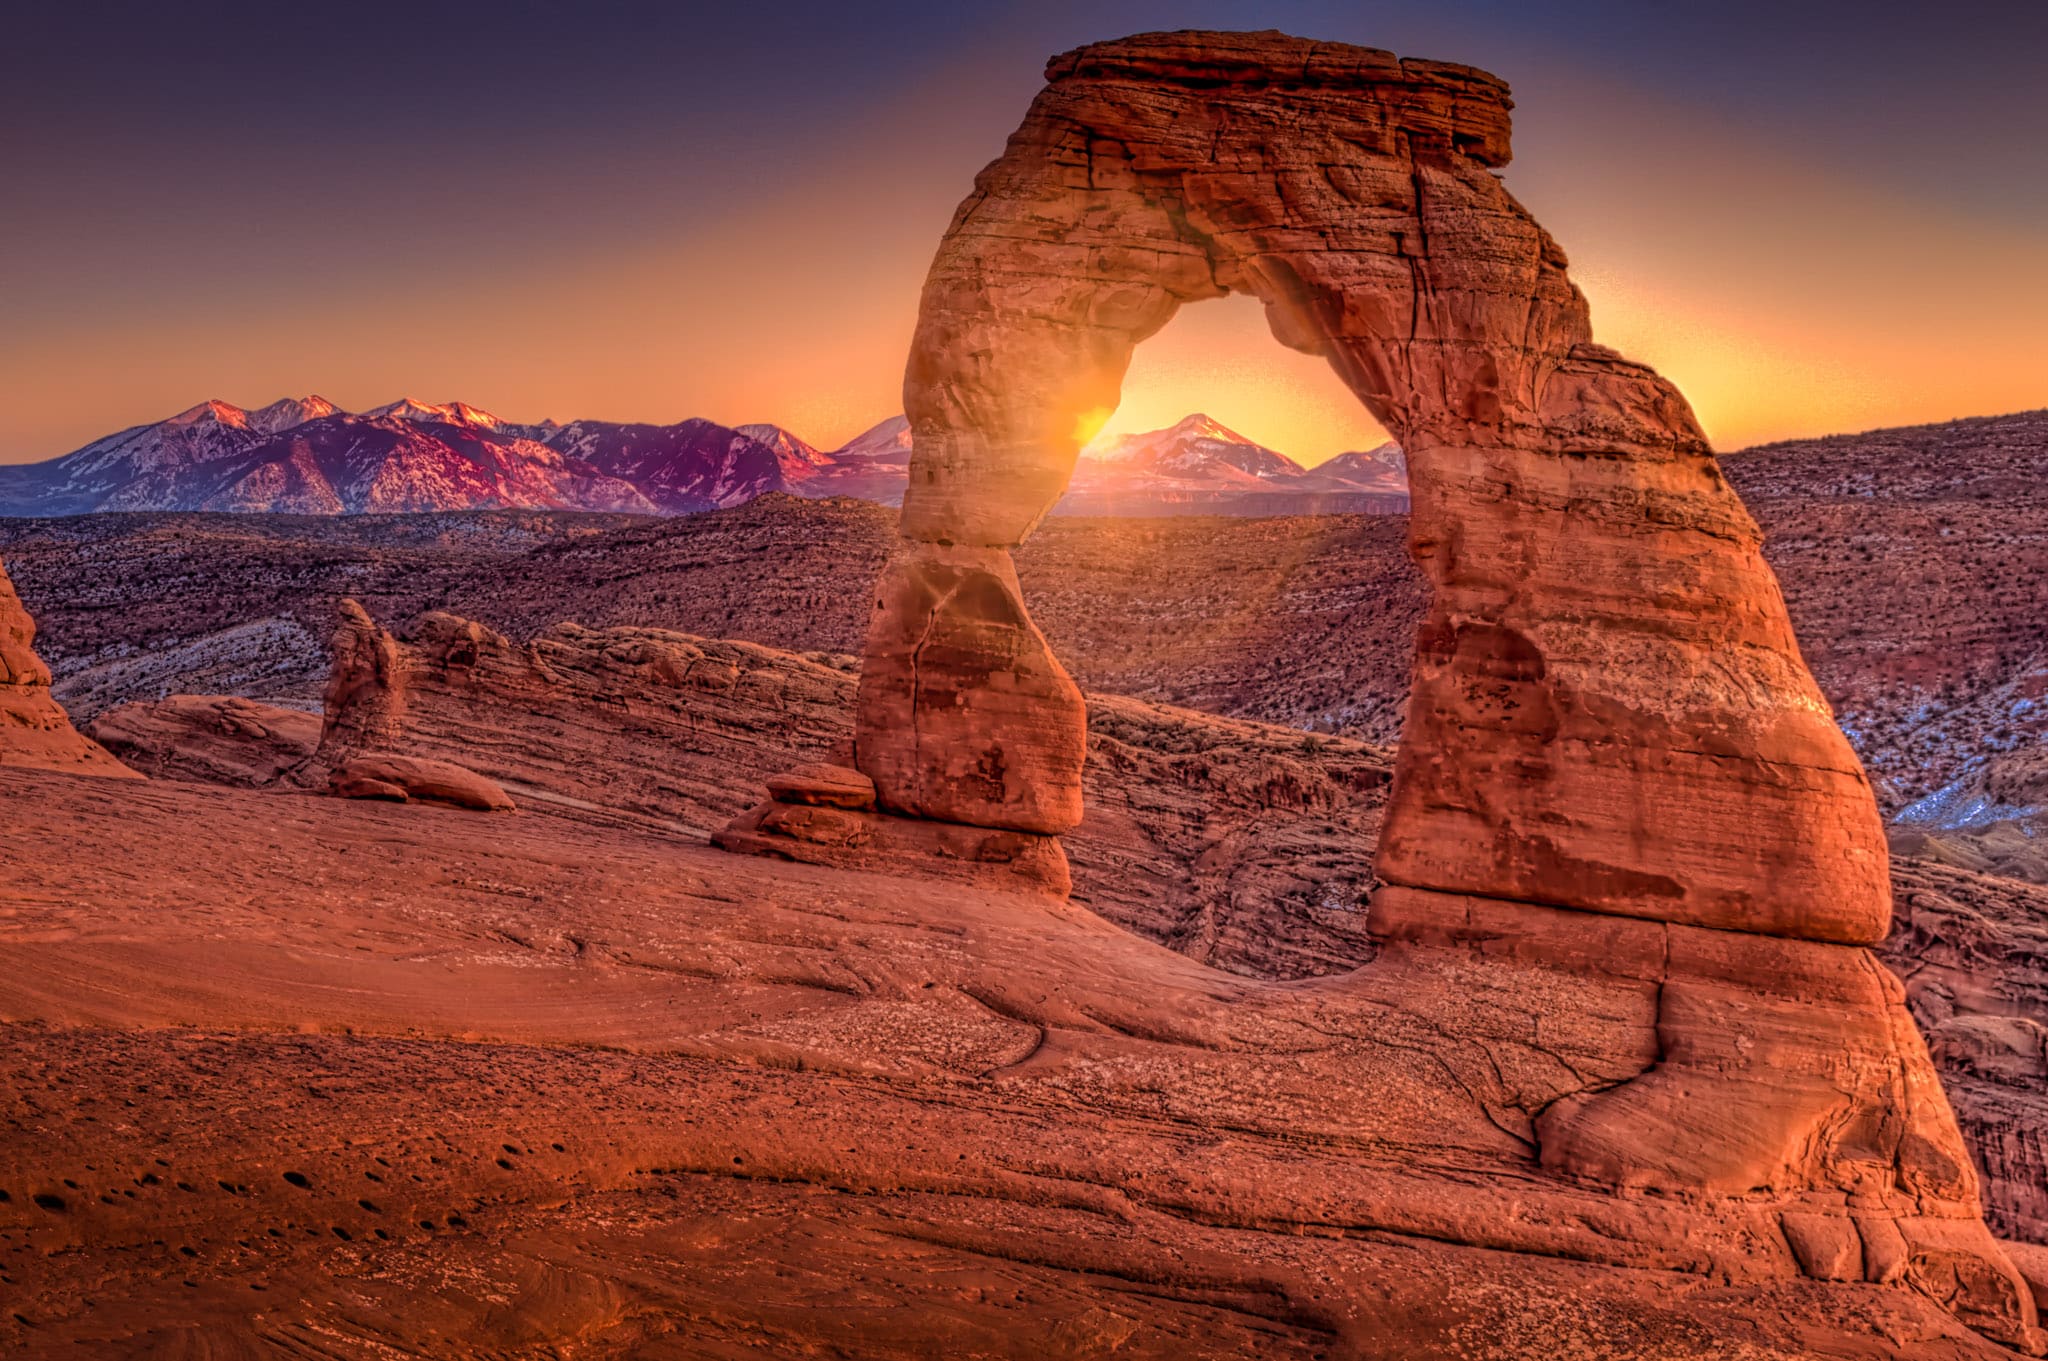 Dusk view of Delicate Arch with the last light of day playing on the La Sal Mountains.